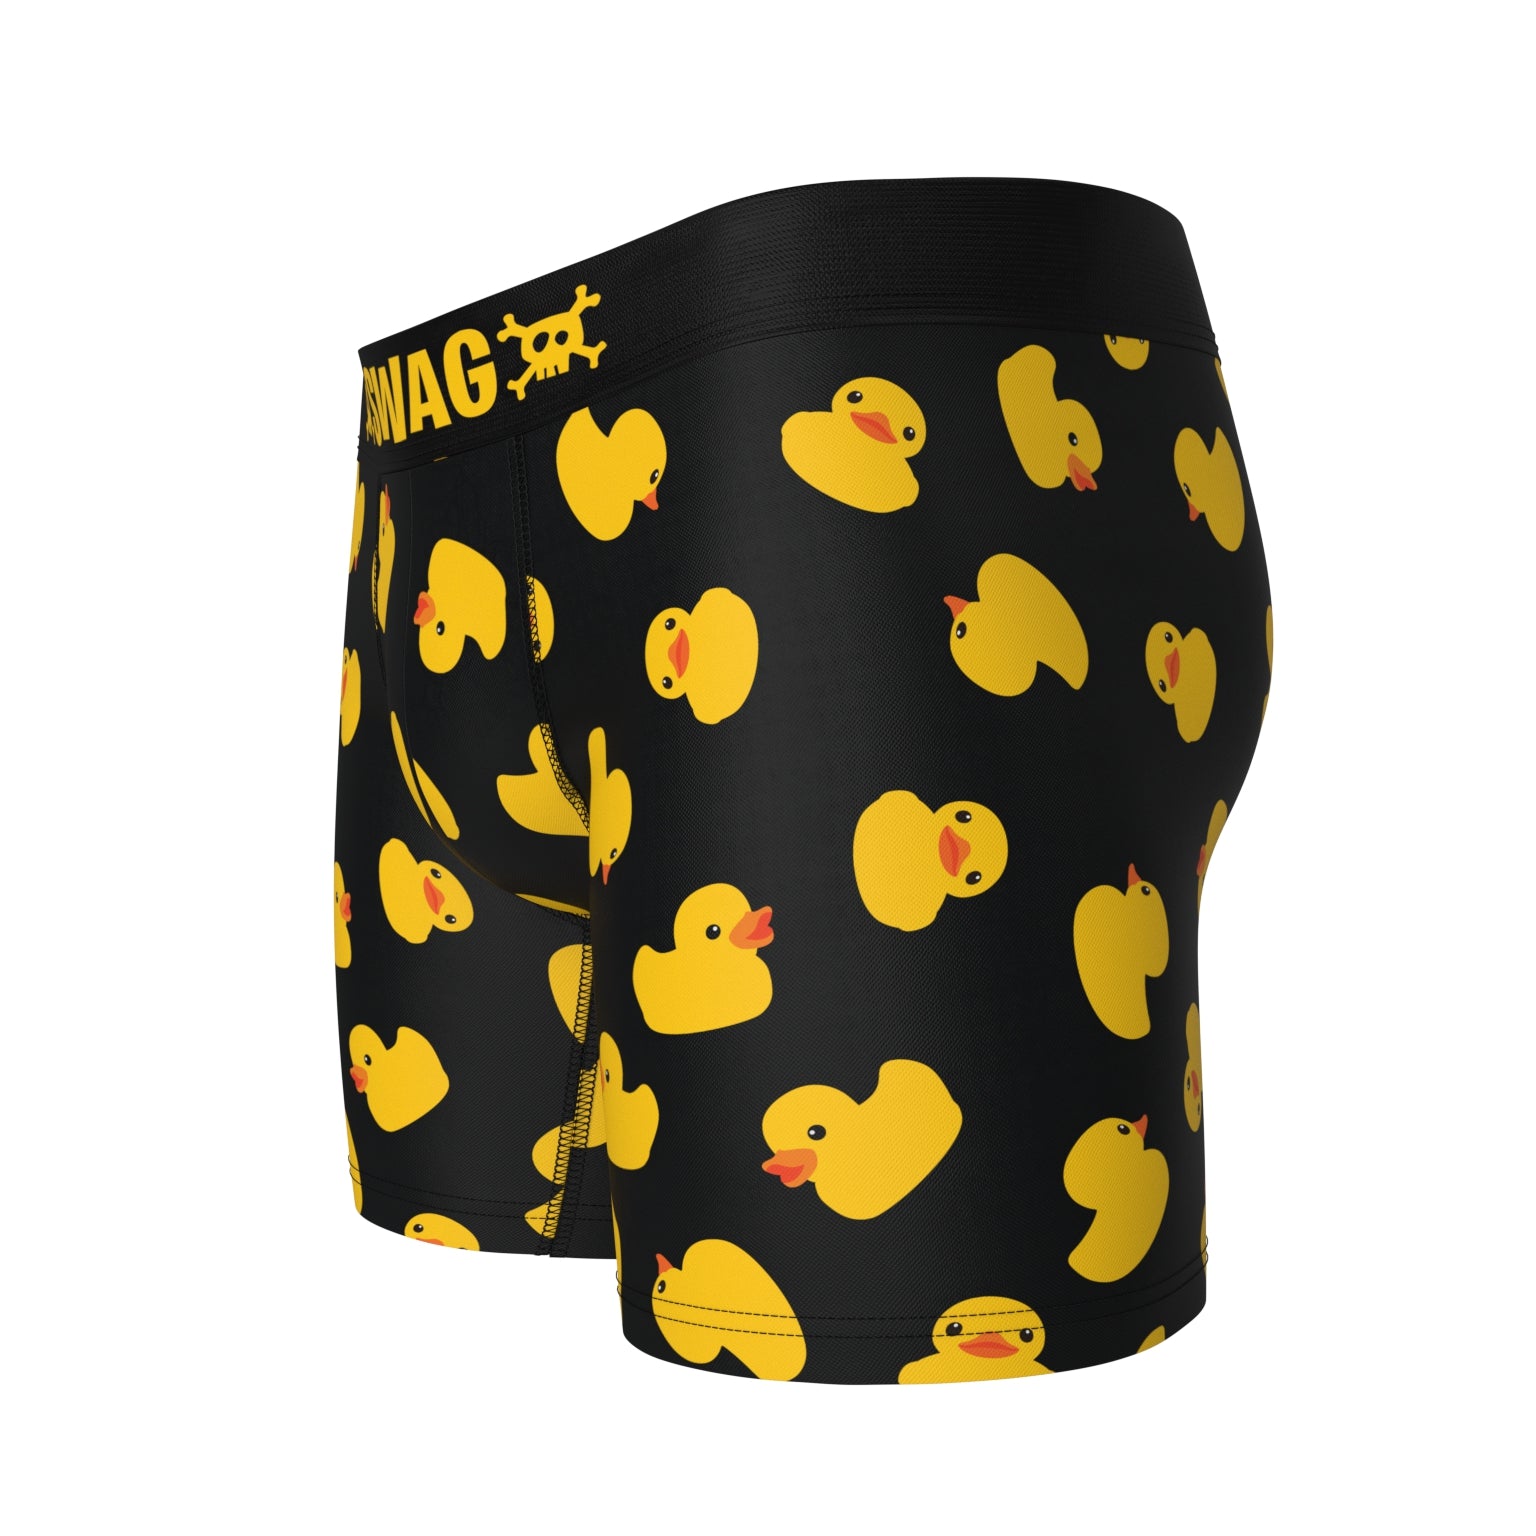 SWAG JUST DUCKY BOXERS